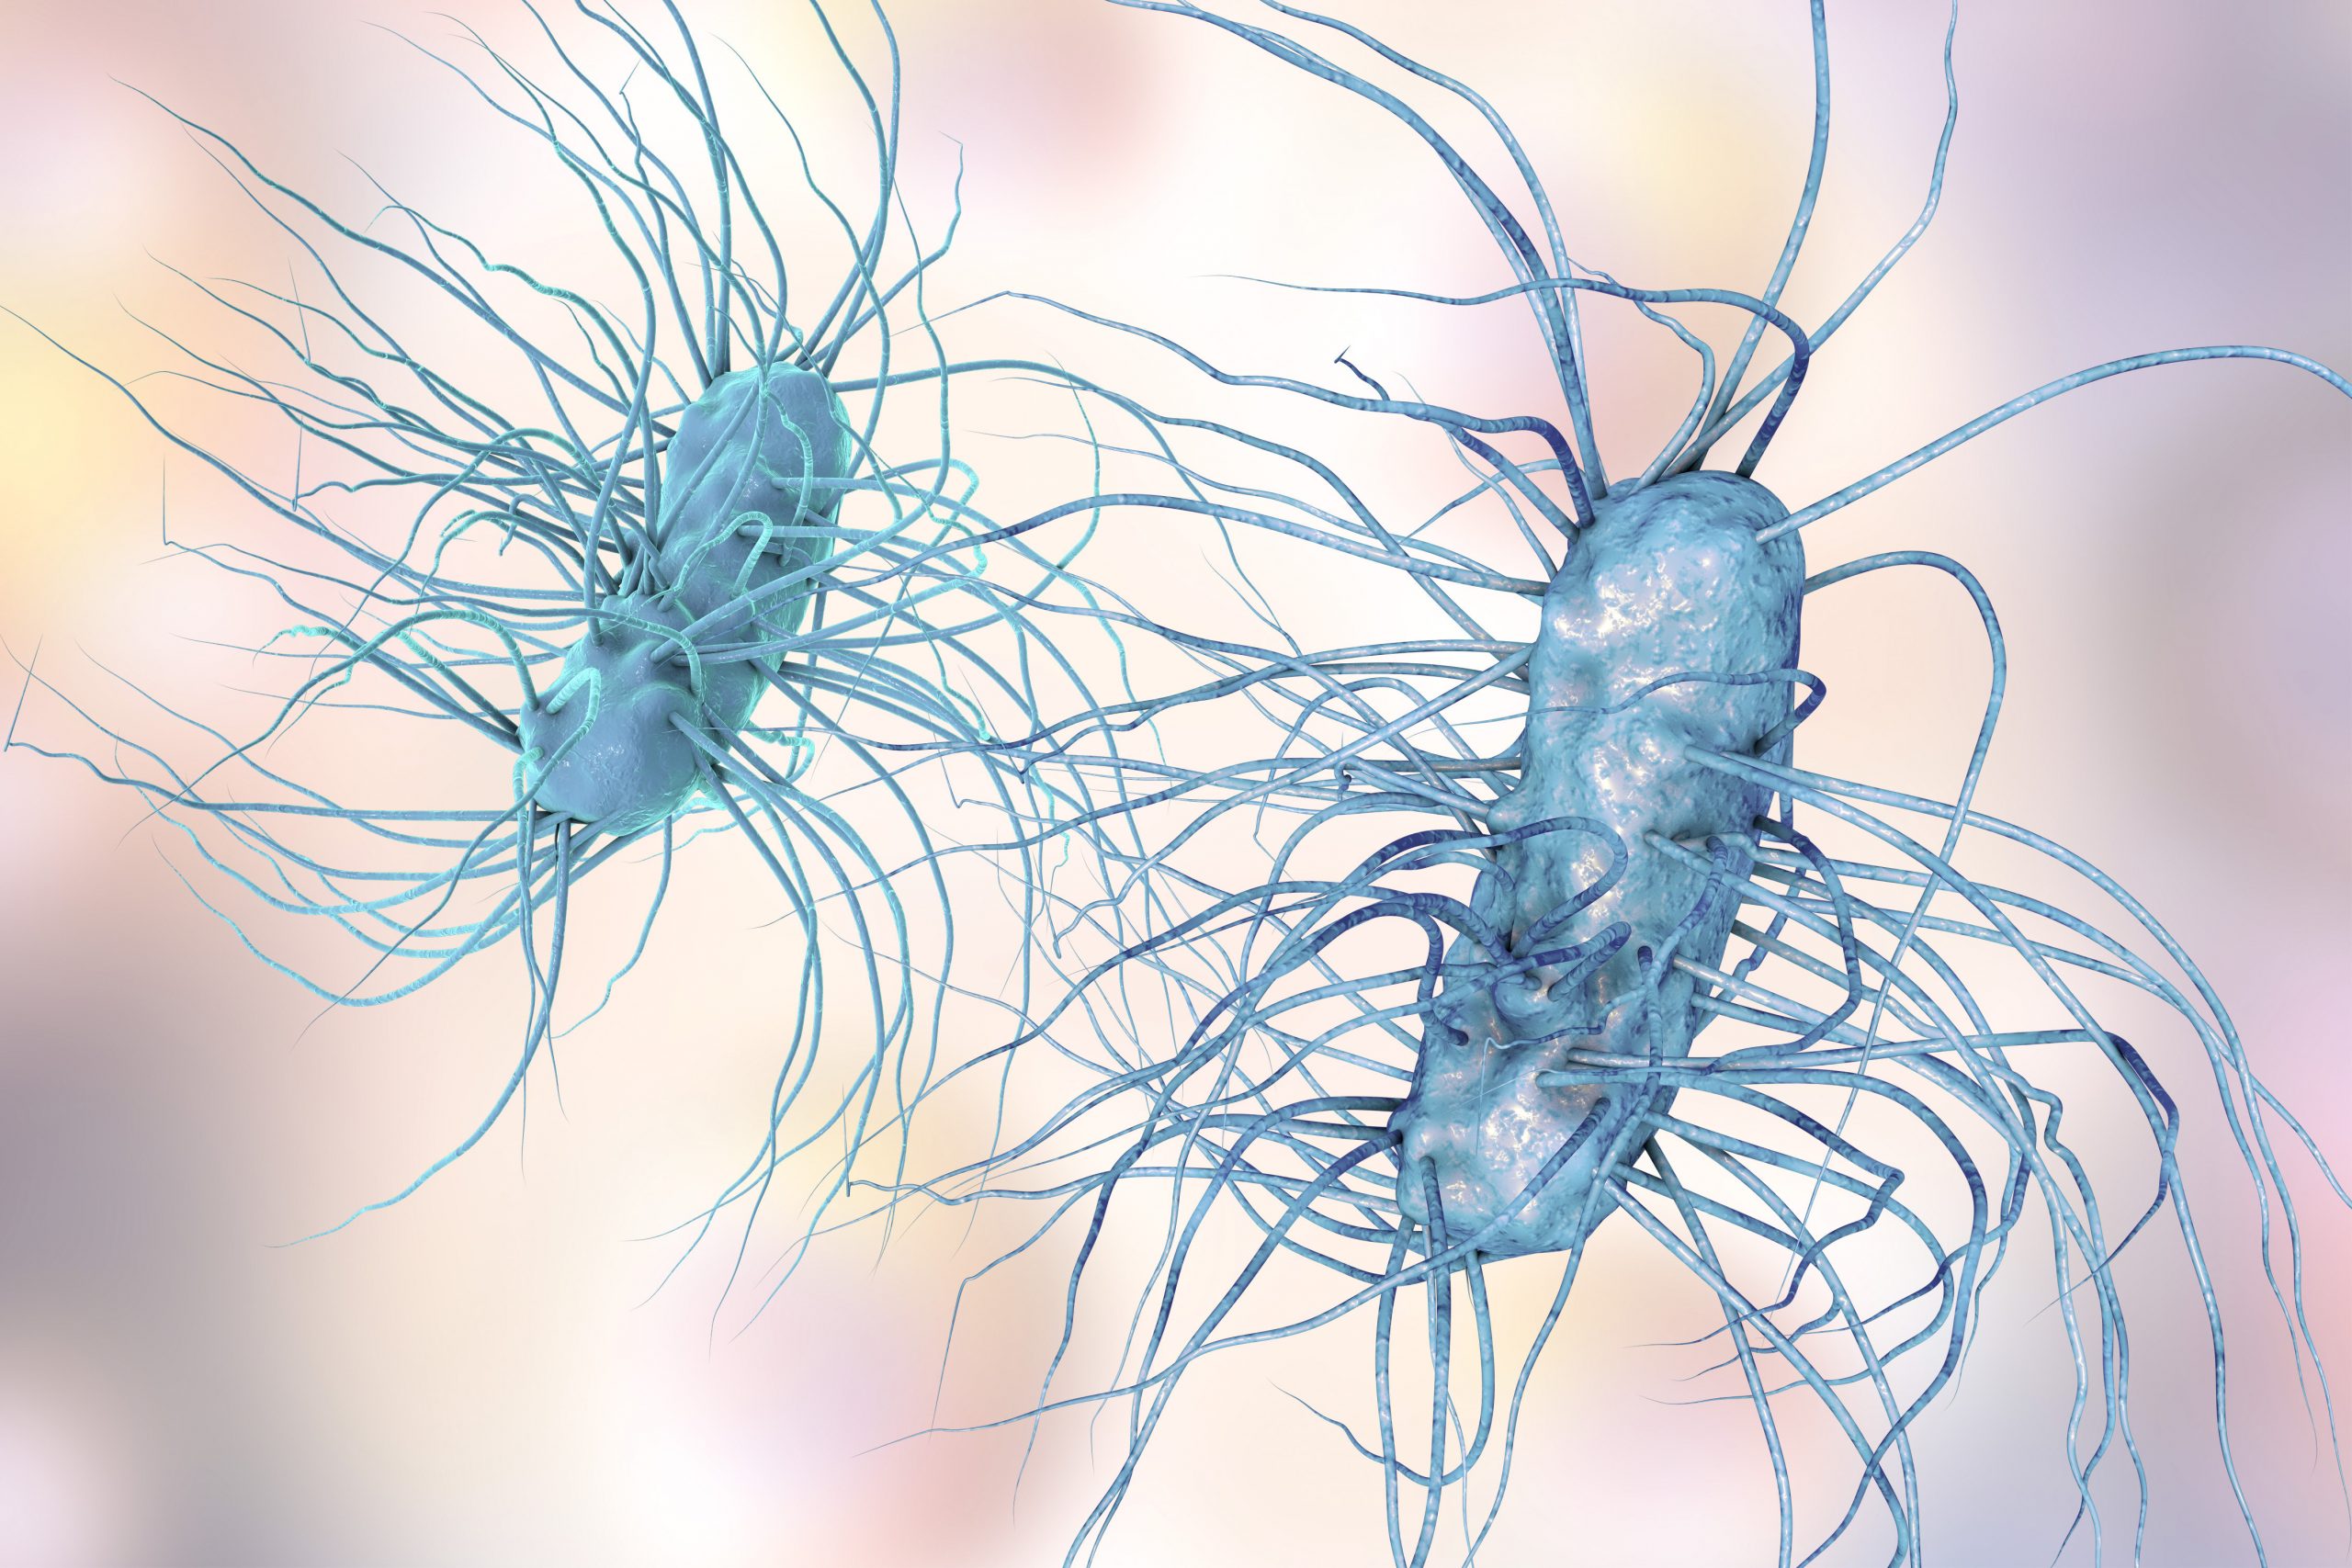 Escherichia coli bacterium, 3D illustration. Gram-negative bacterium with peritrichous flagella which is part of normal intestinal microflora and also causes enteric and other infections; Shutterstock ID 510419119; PO: Antibiotic Reduction